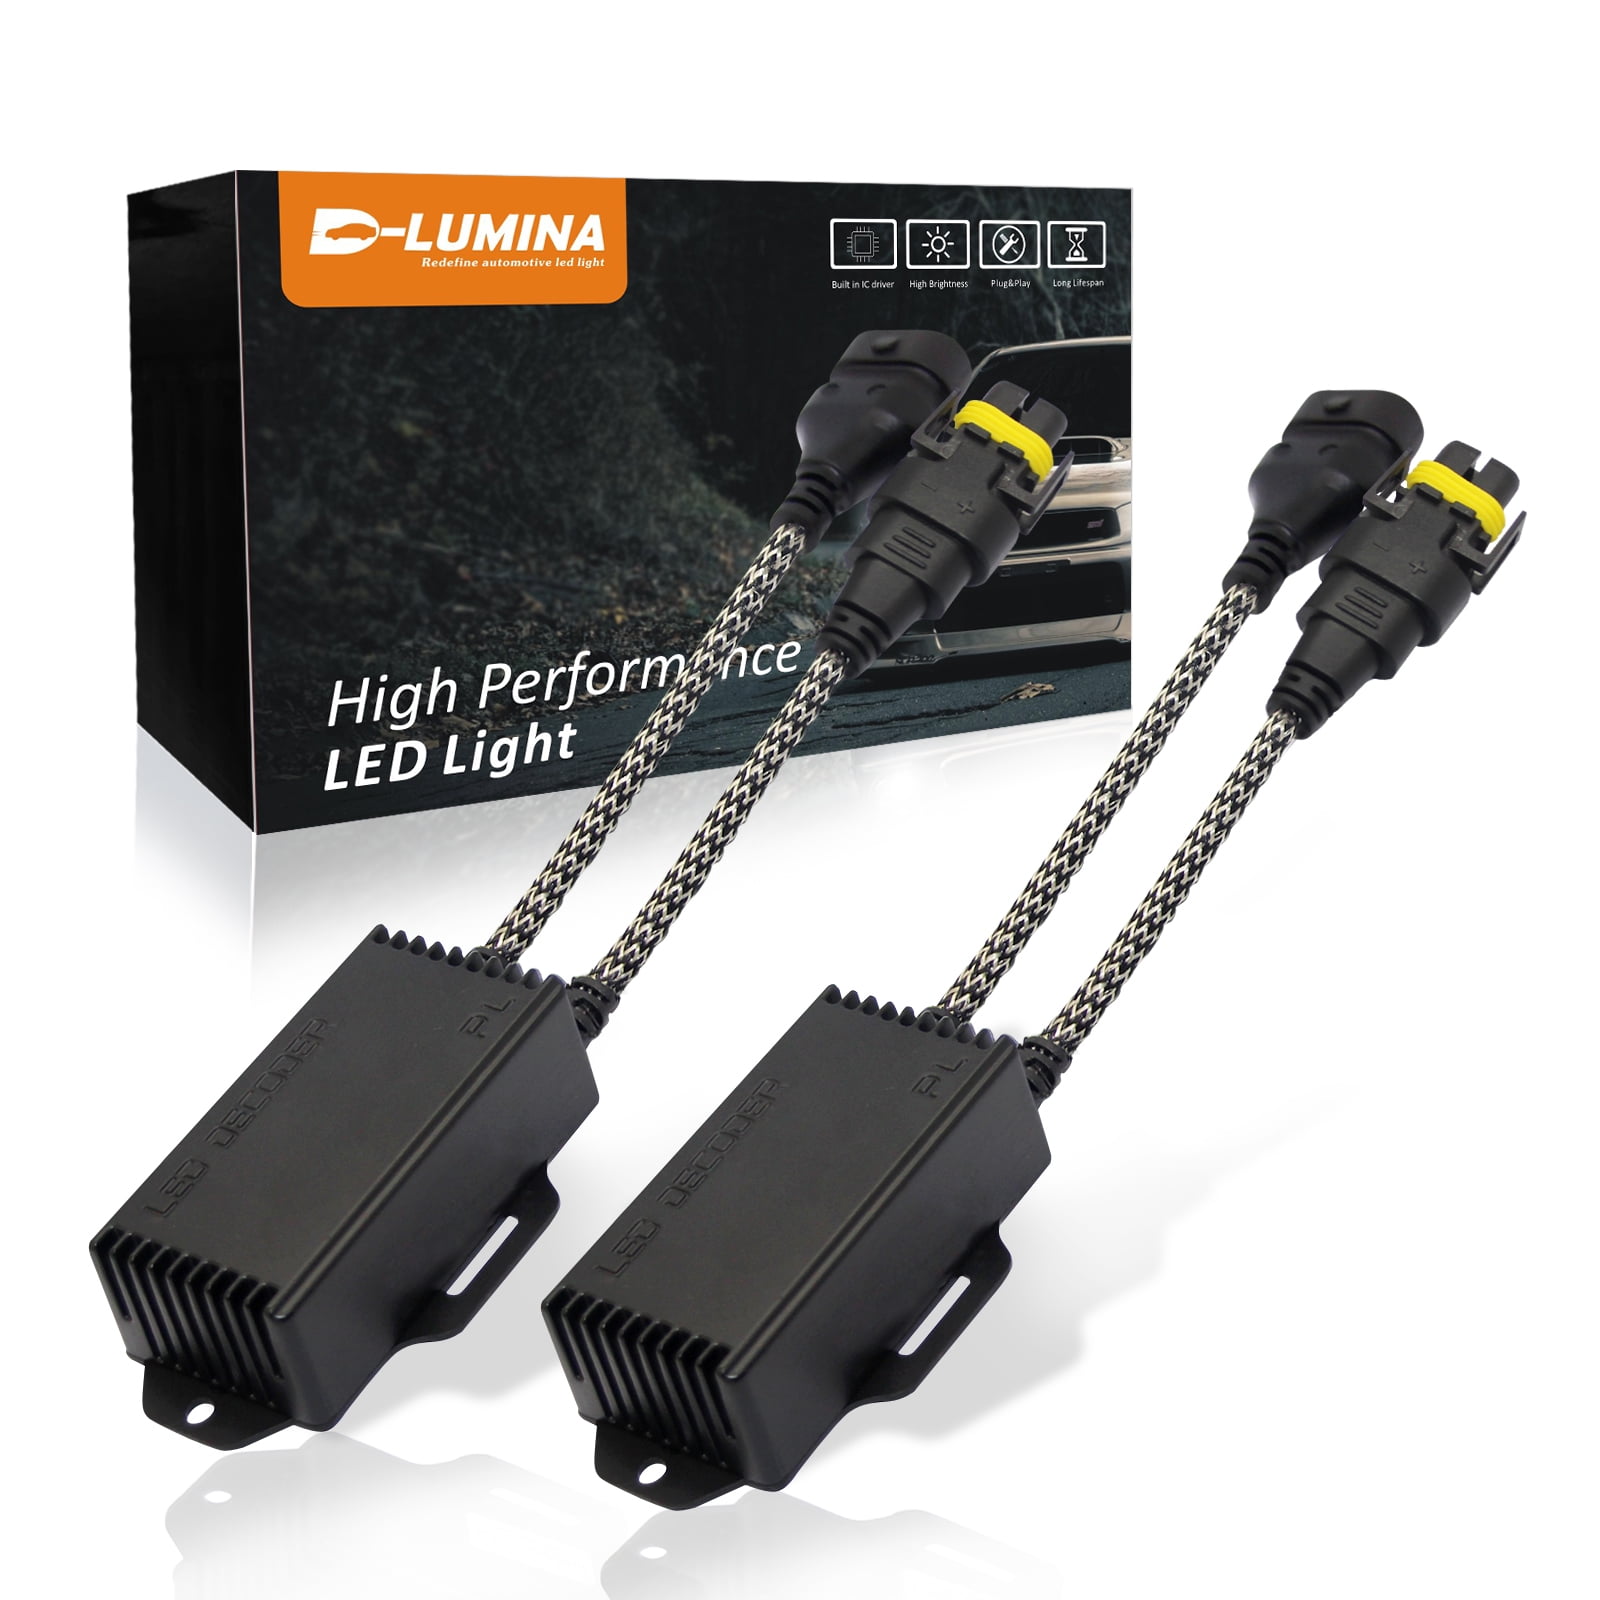 D-Lumina LED Canbus Decoder for Headlights, Error Free Warning Resistors  Canceller fit H8 H9 H11(1 Pair)